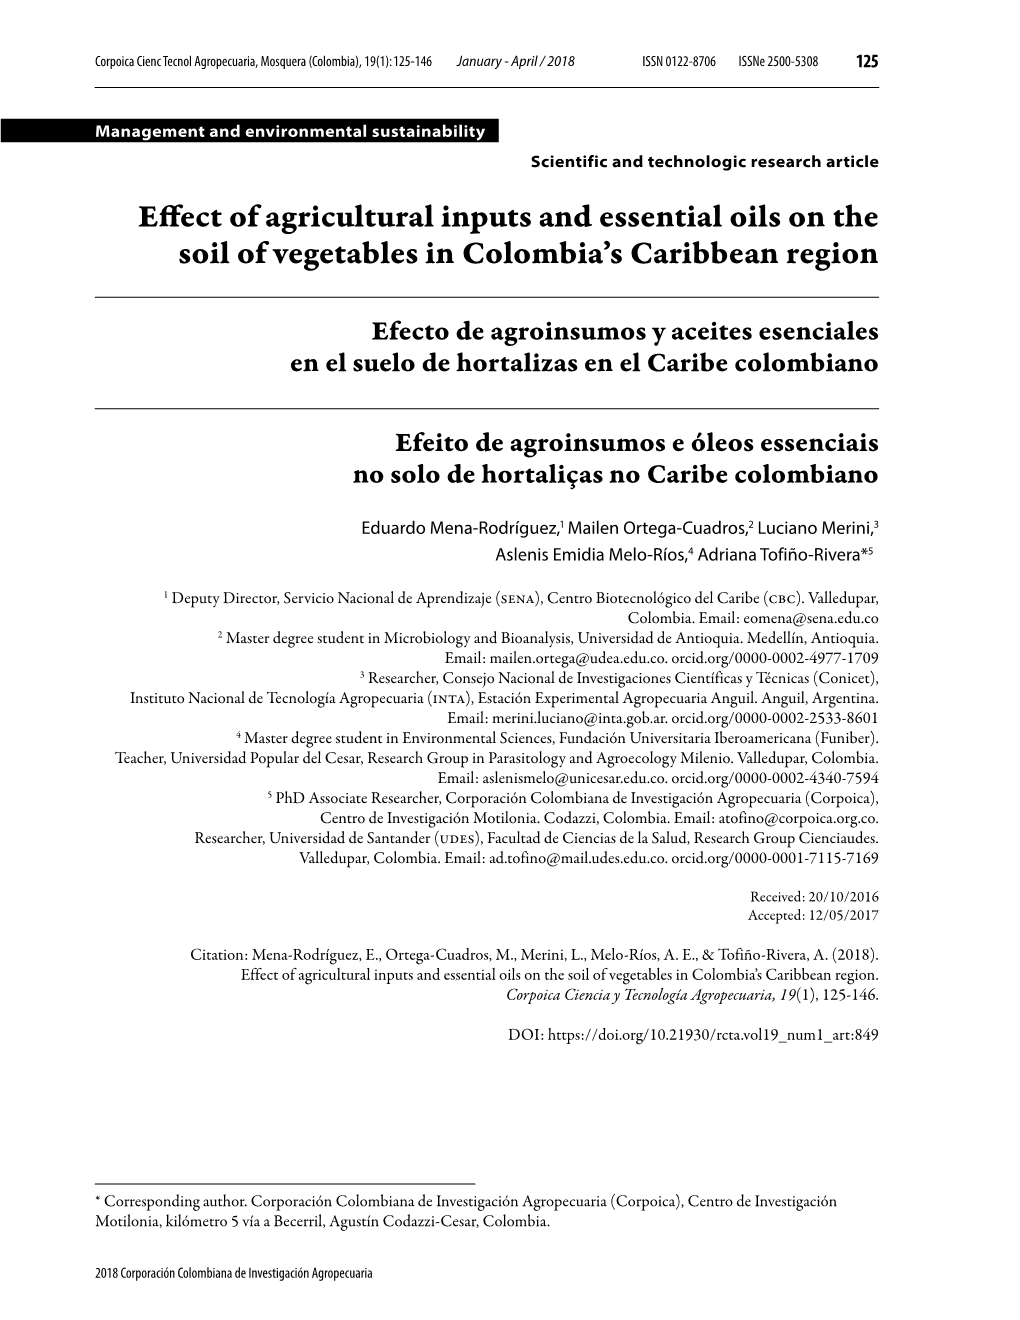 Effect of Agricultural Inputs and Essential Oils on the Soil of Vegetables in Colombia’S Caribbean Region